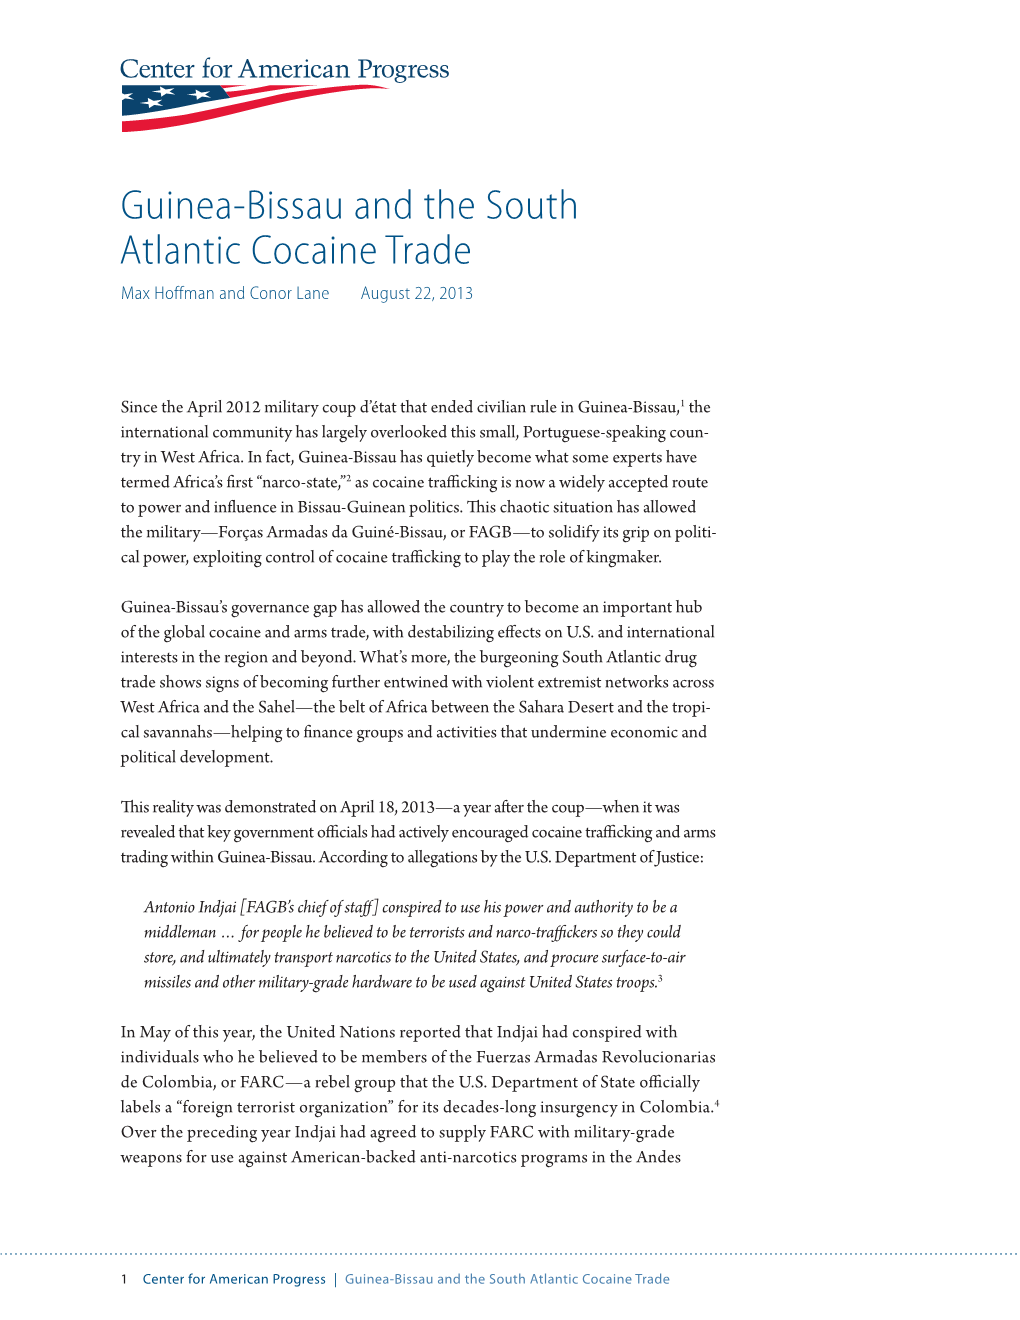 Guinea-Bissau and the South Atlantic Cocaine Trade Max Hoffman and Conor Lane August 22, 2013